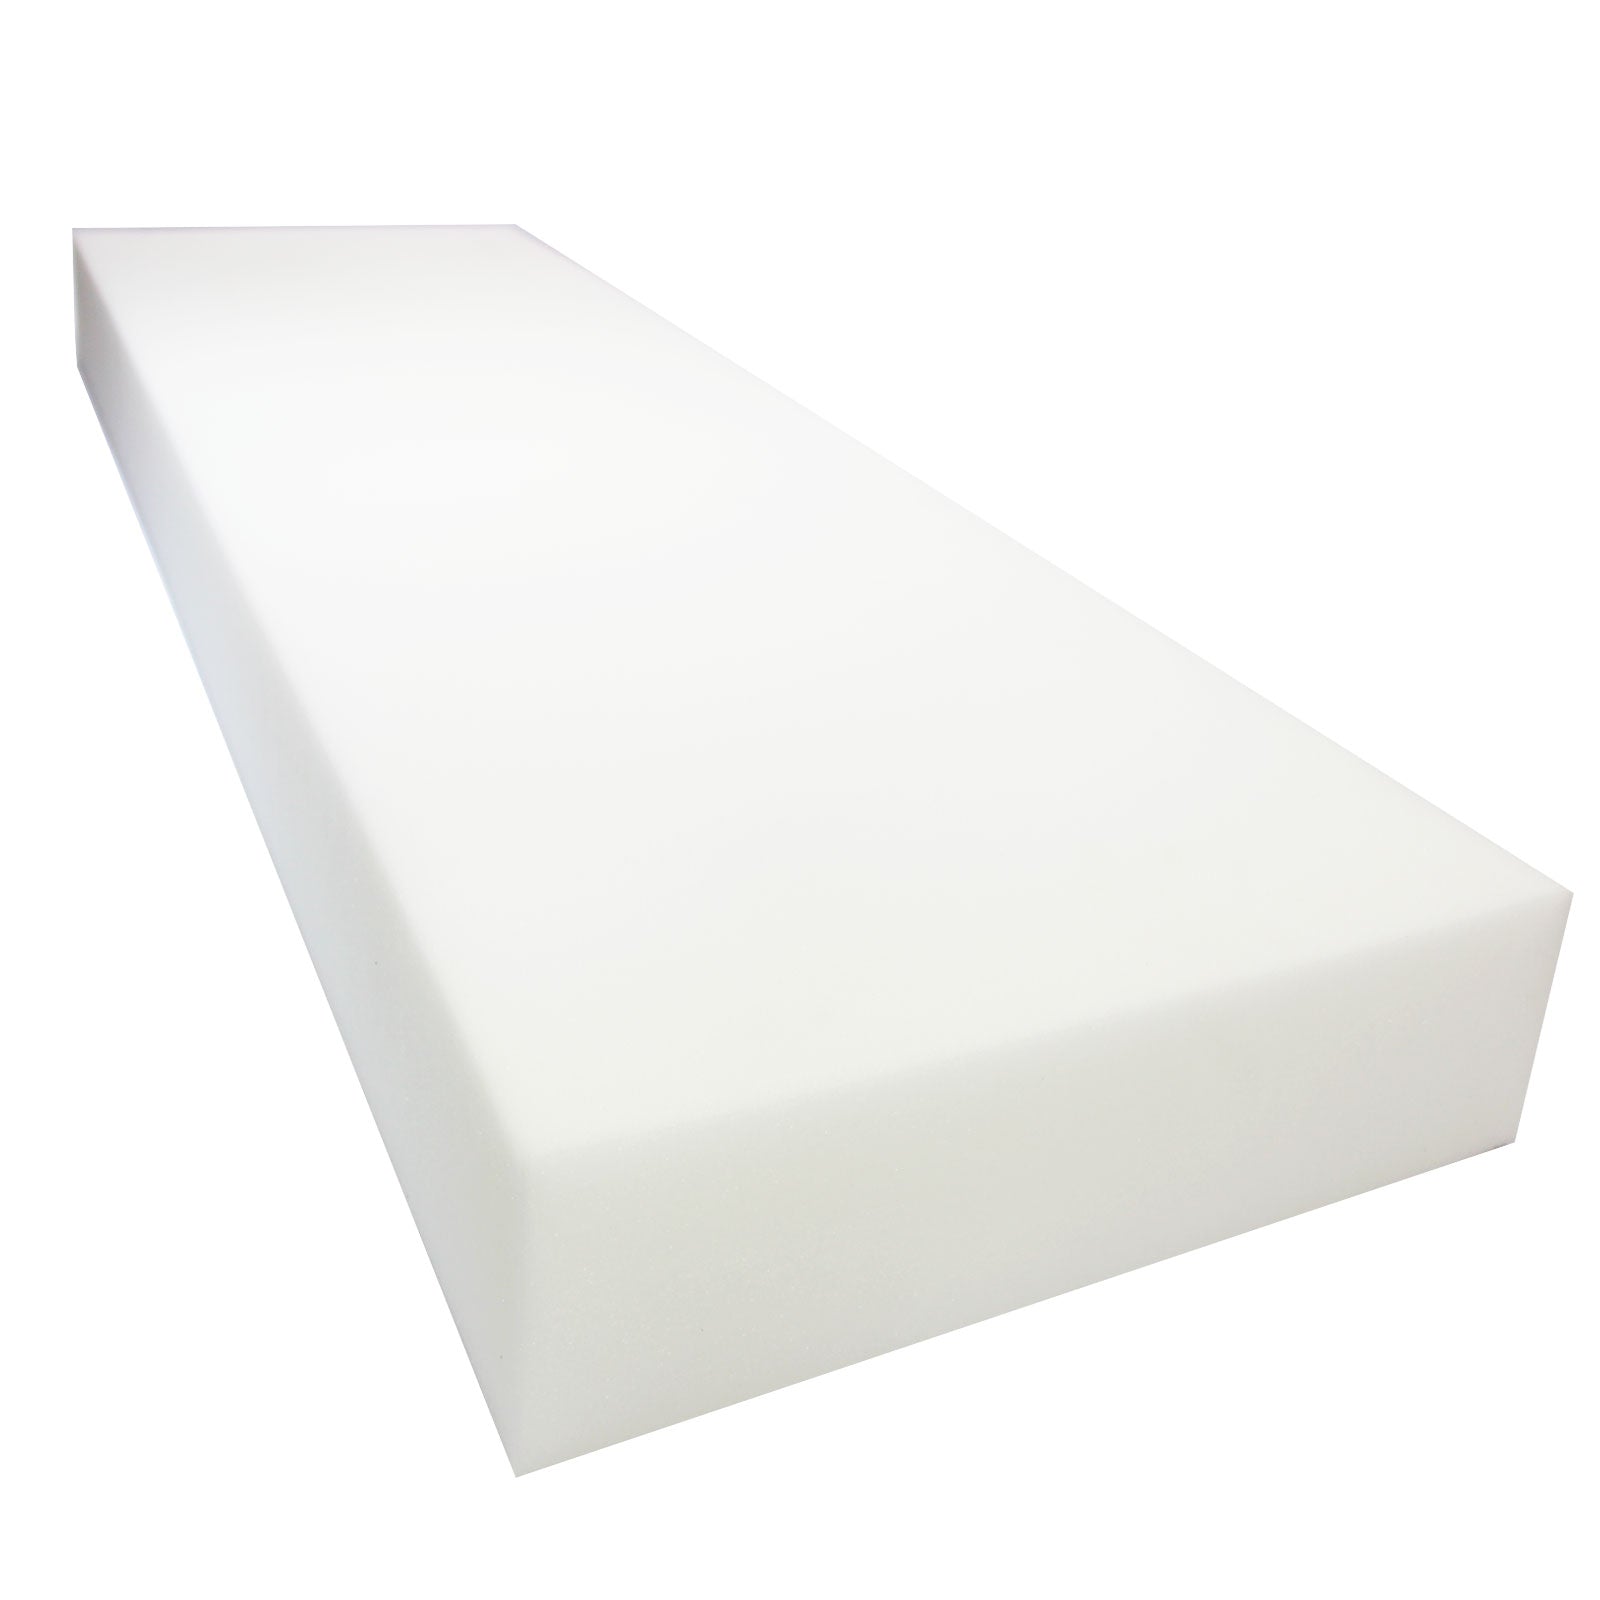 DURAFOAM High-Density Foam for Upholstery - Medium Firm in Various Sizes  from 60 x 20 to 80 x 94 - Thickness Options from 0.5 to 6 - Perfect  for Cushions, Seats, and